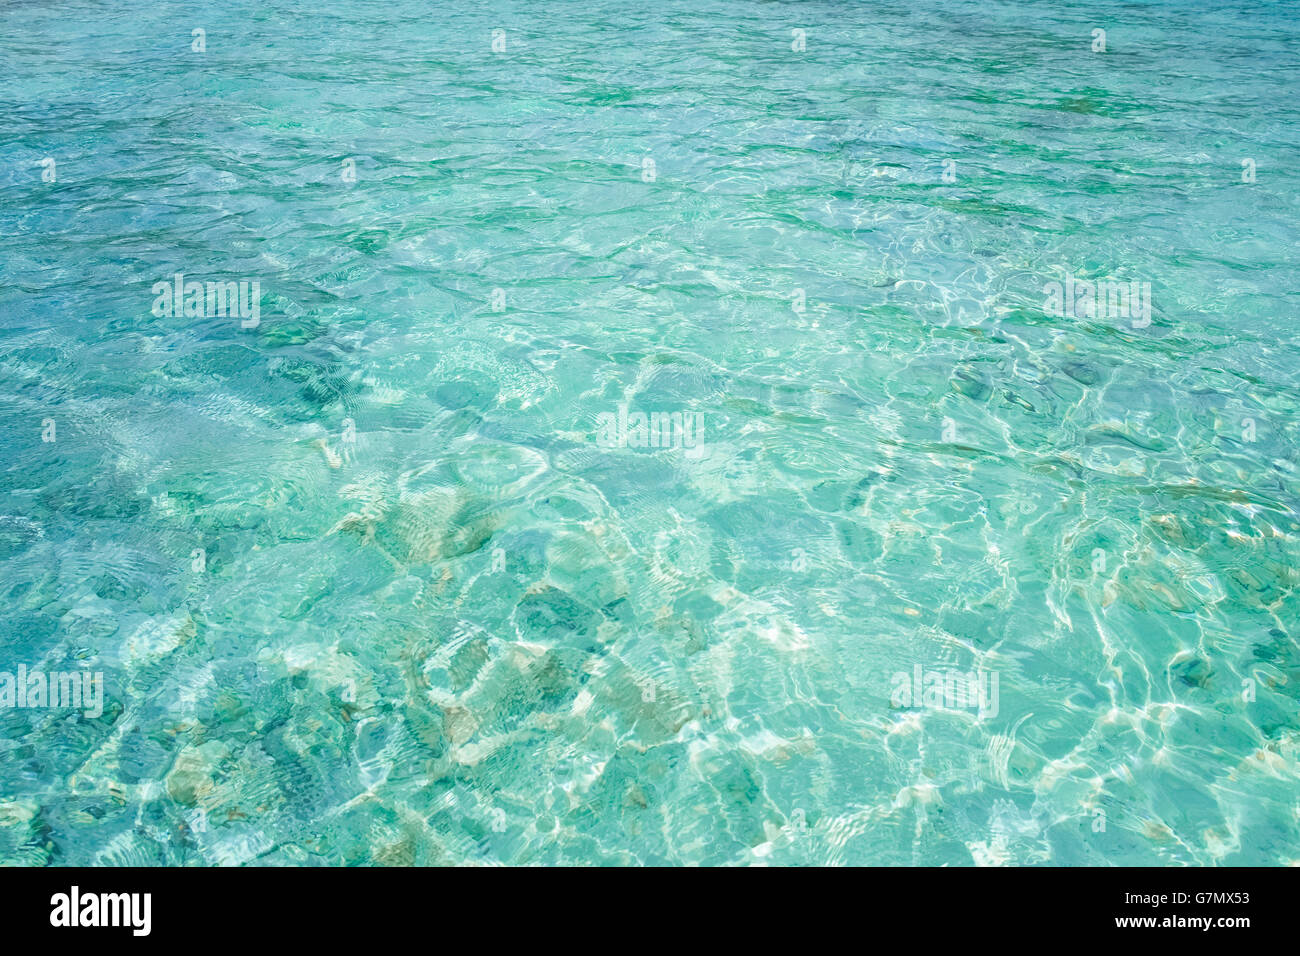 Clear water texture of the ocean floor on Craiyon